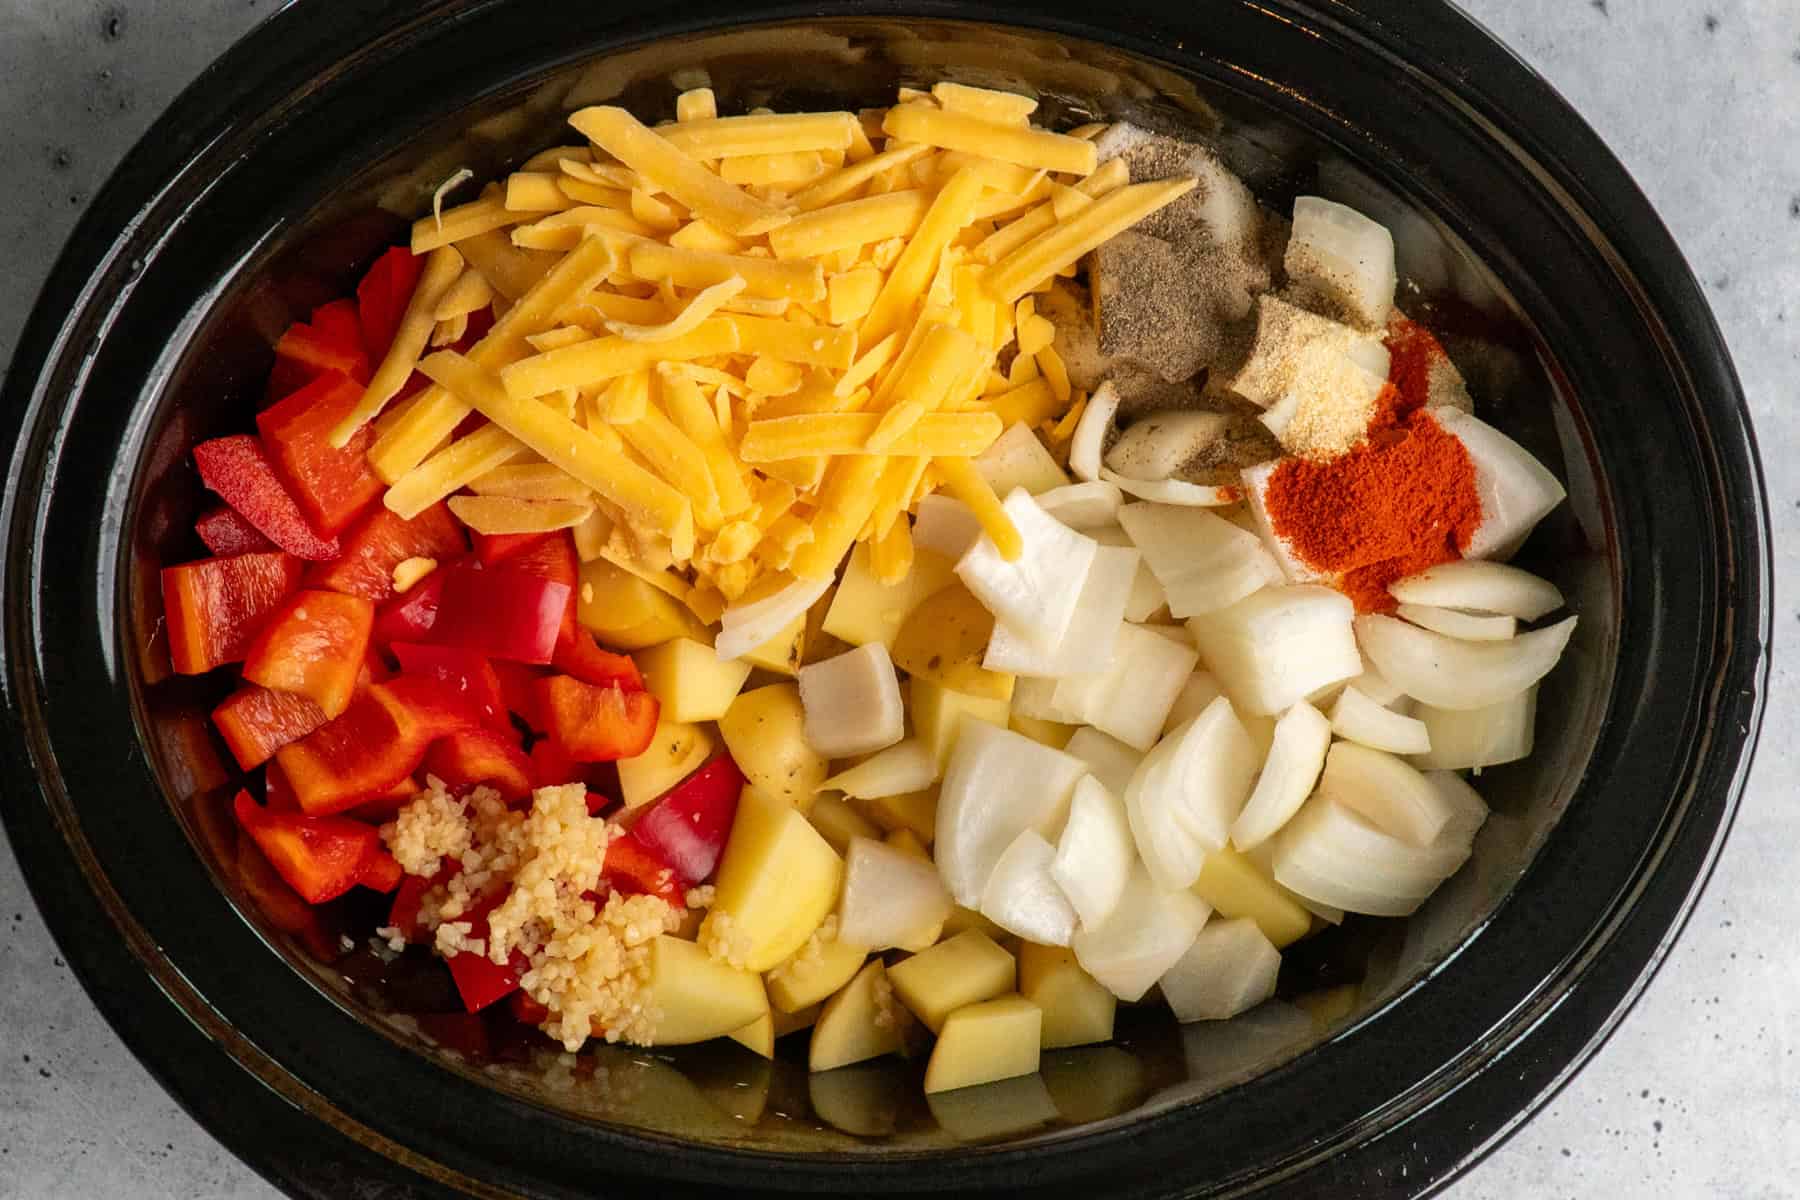 All the ingredients for breakfast potatoes in a Crock Pot.